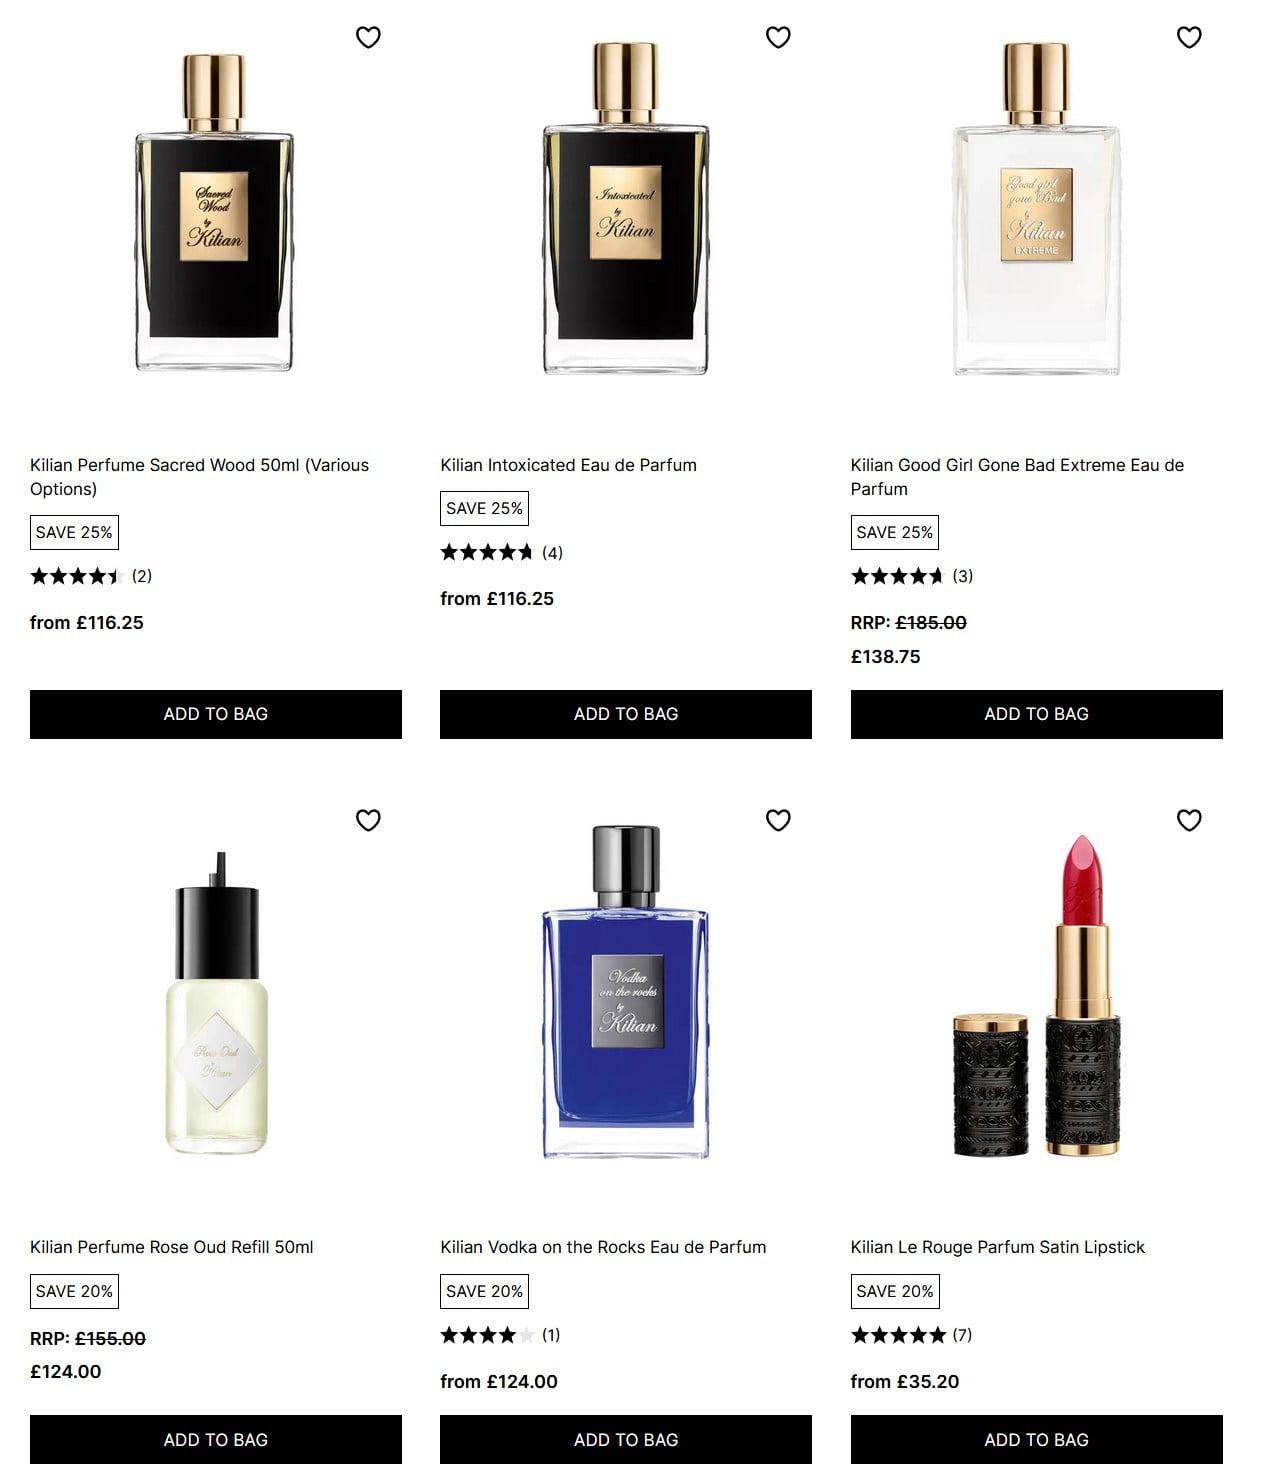 Up to 25% off Kilian at Cult Beauty